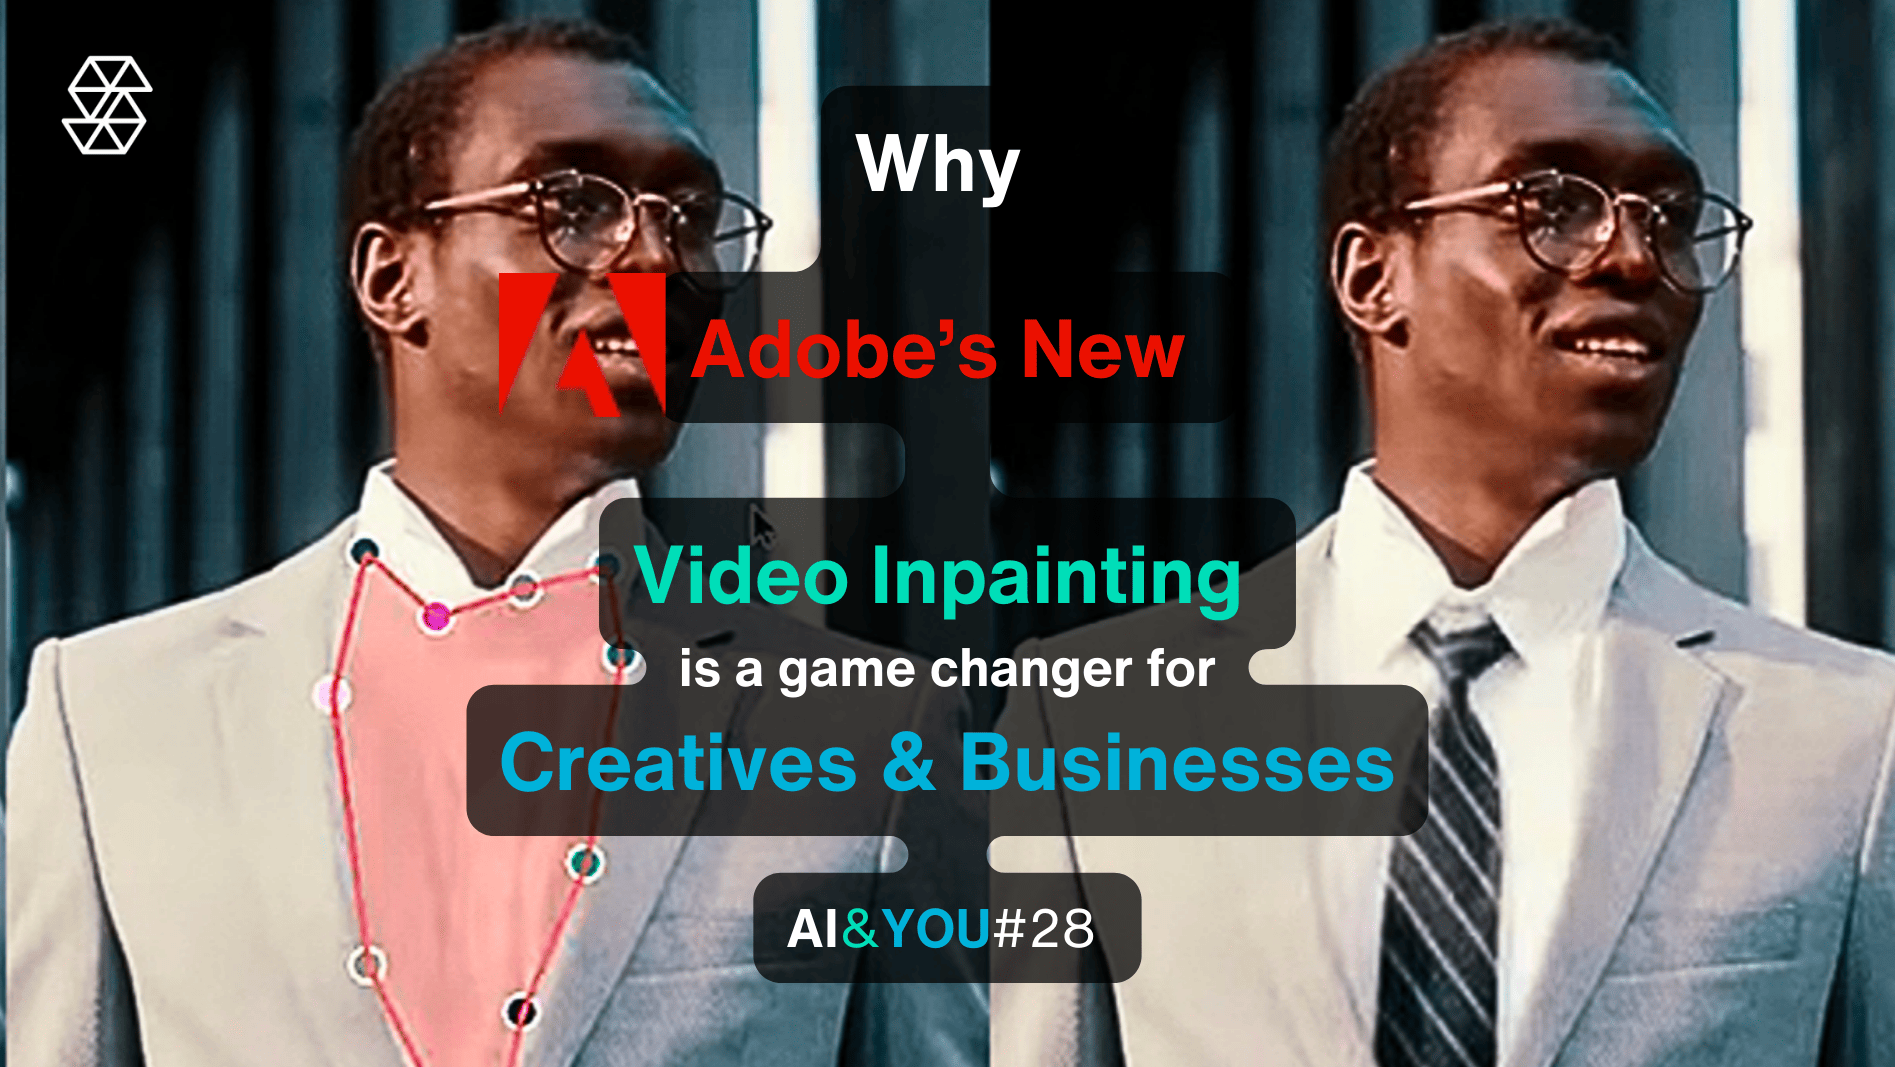 AI&YOU#28: Adobe’s ‘Project Fast Fill’ Revolutionizes Video Inpainting for Creators & Businesses